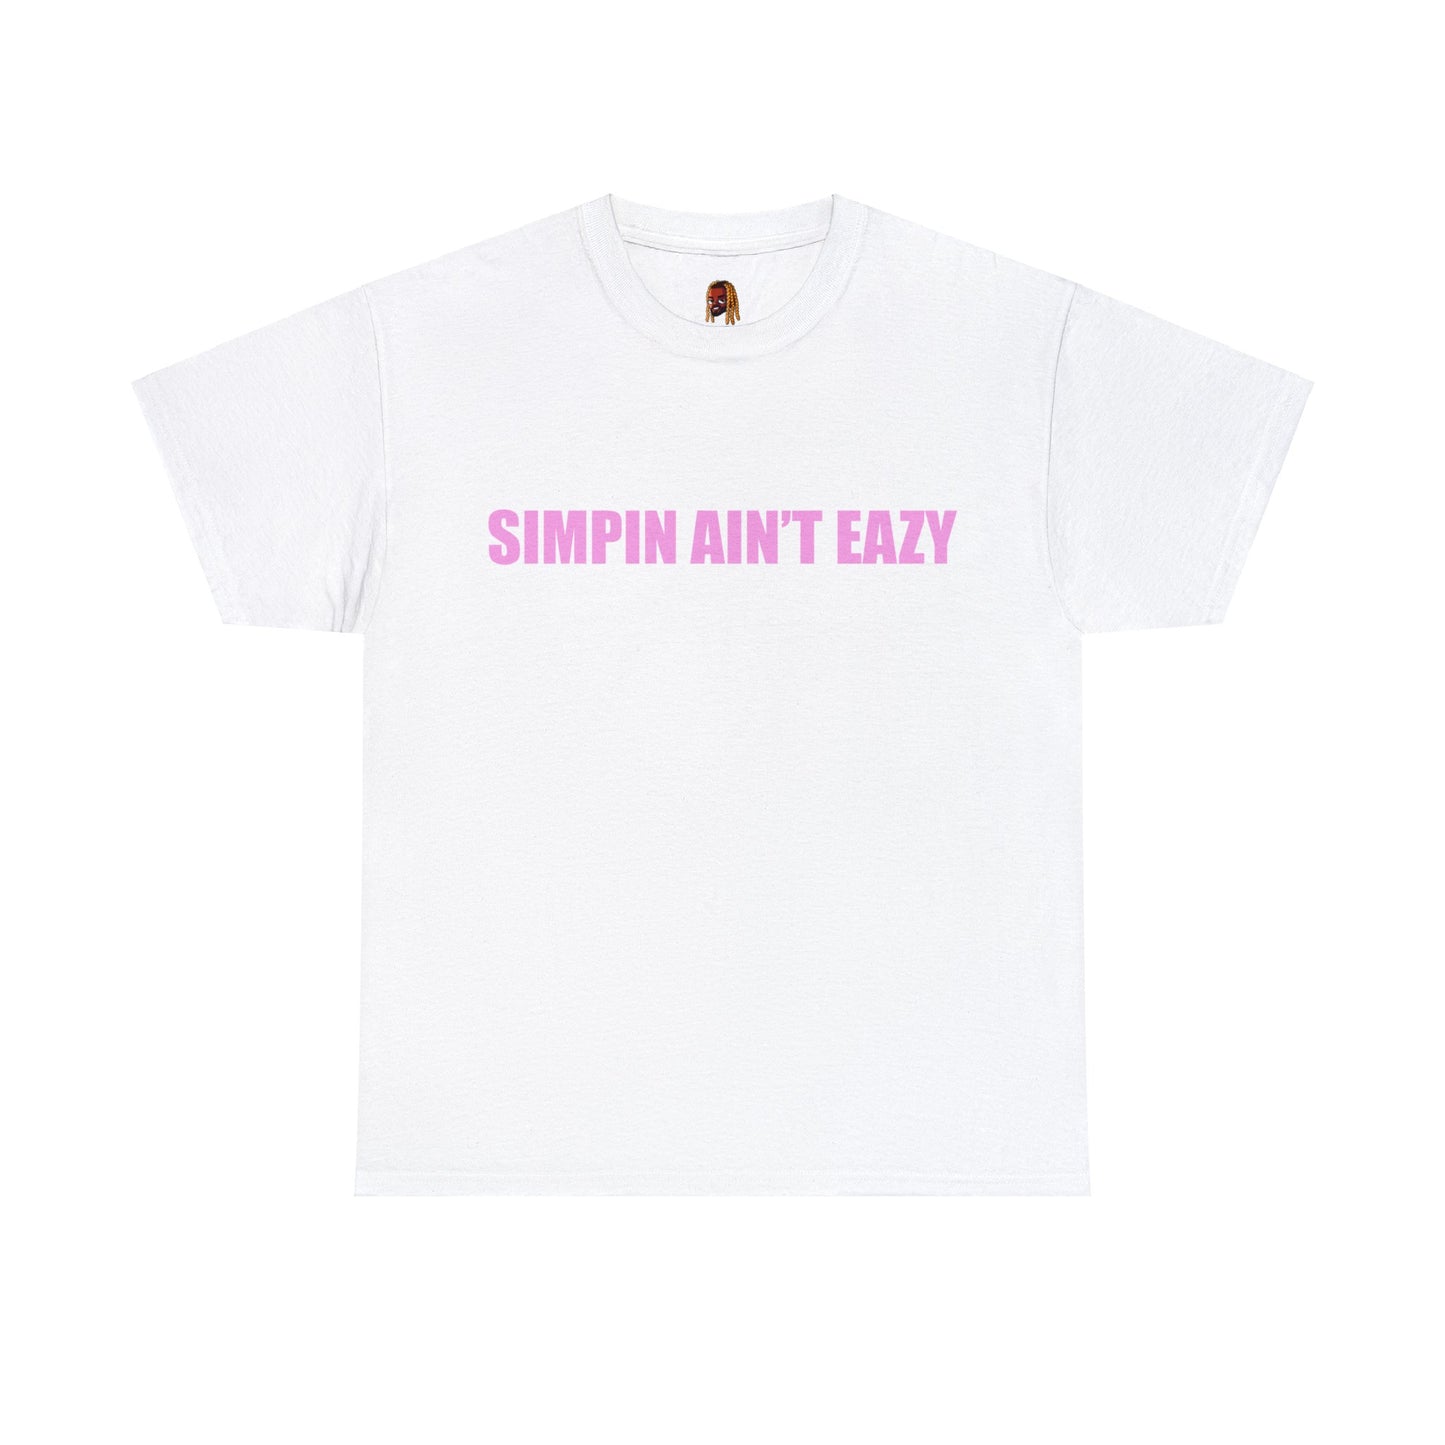 Simpin Ain't Eazy White & Pink Tee